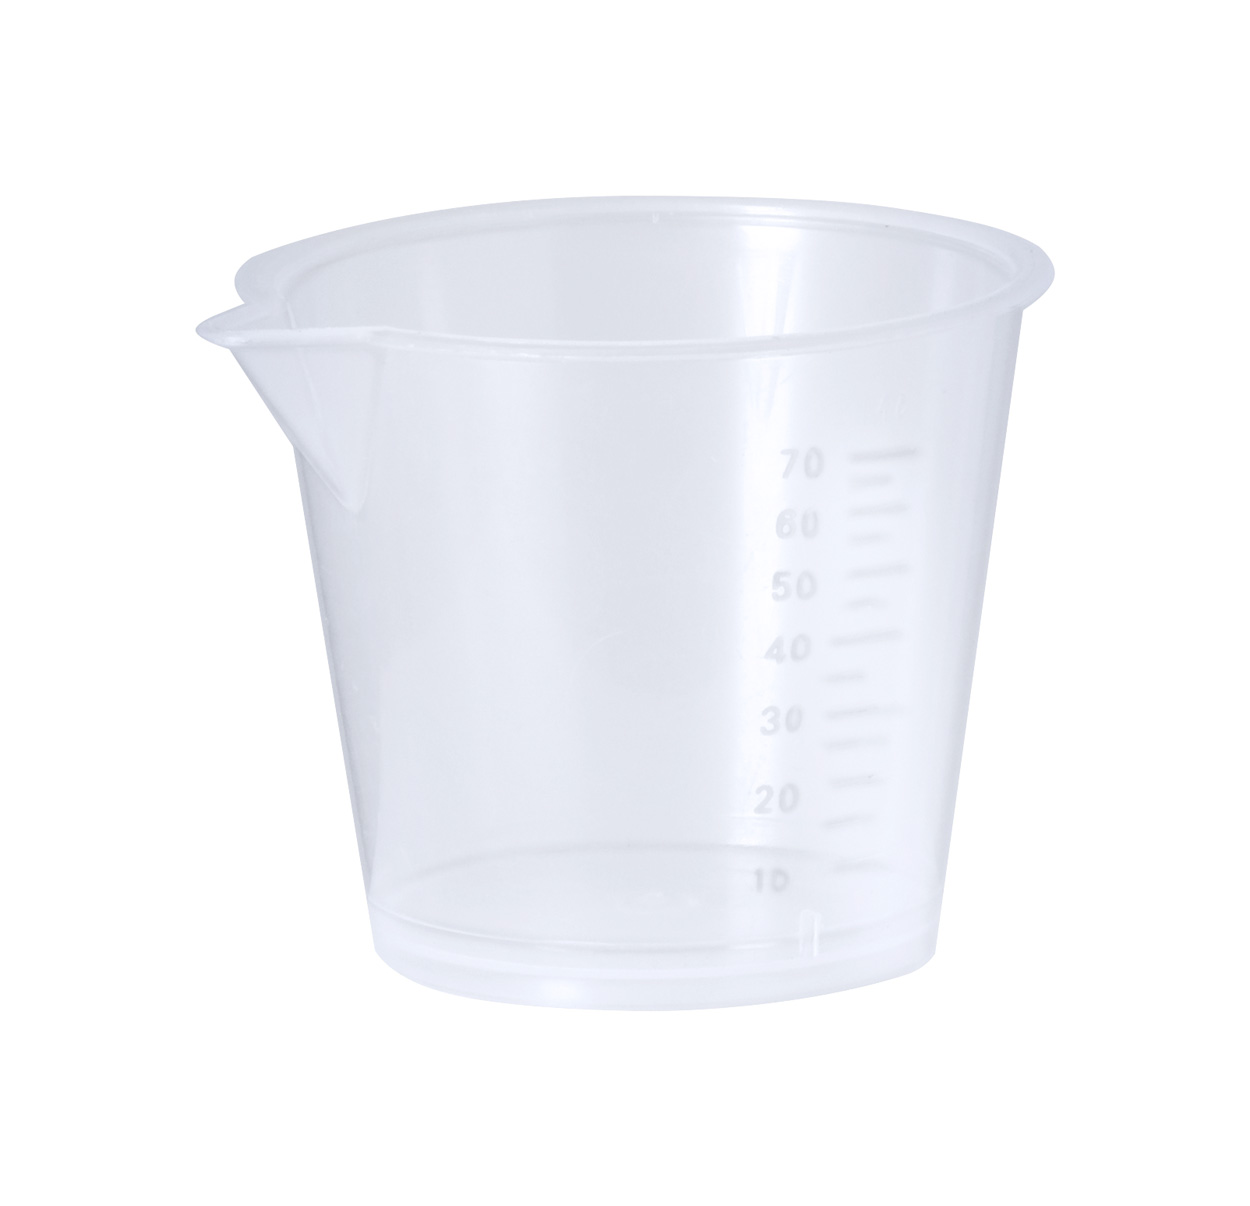 Promo  Roswal measuring cup